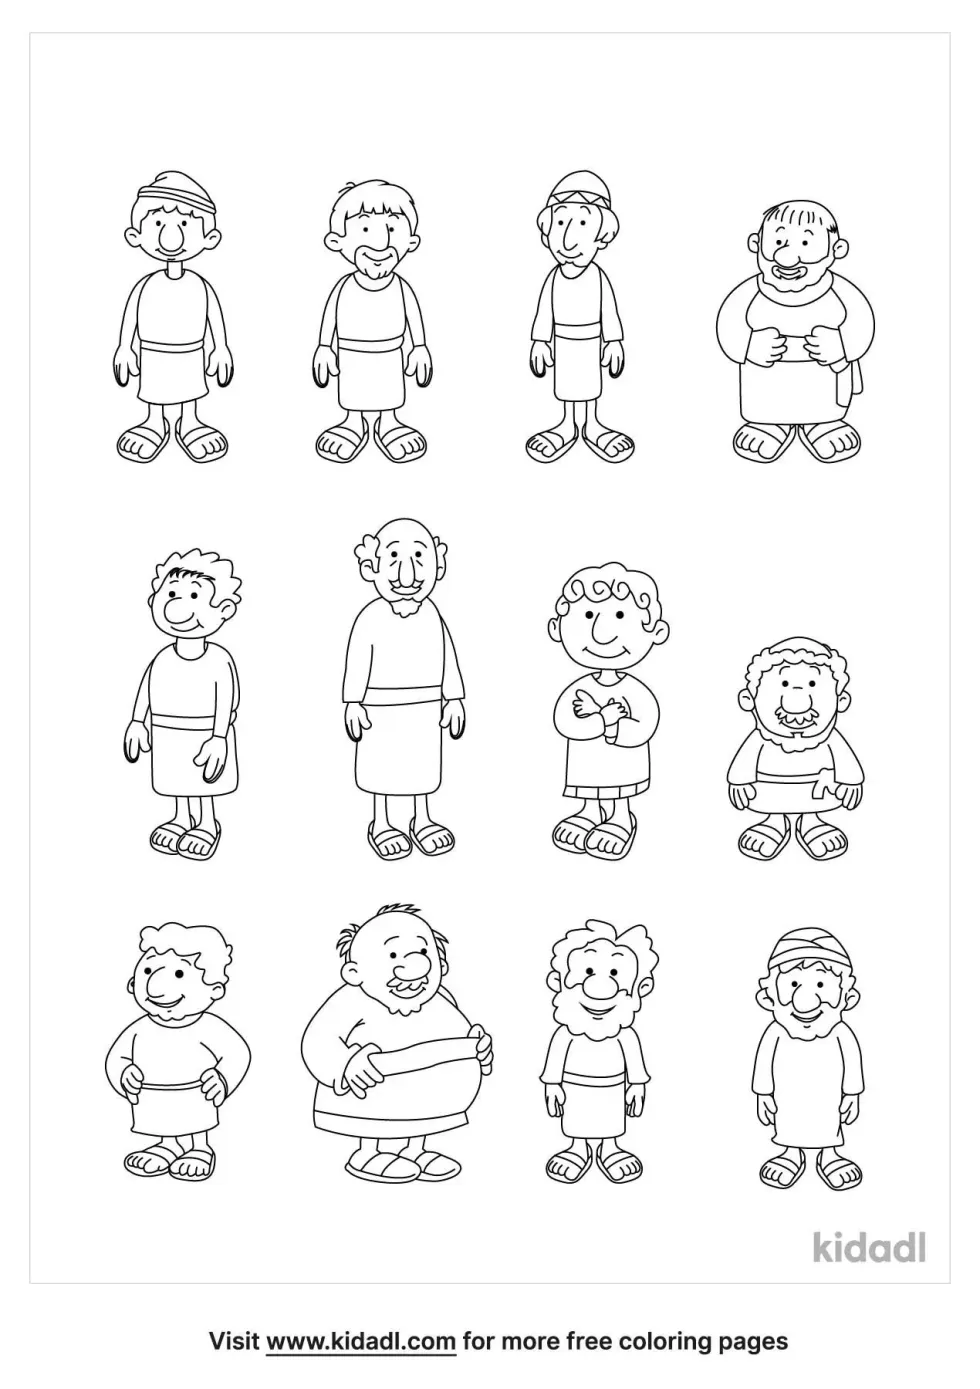 12 Sons Of Jacob Coloring Page